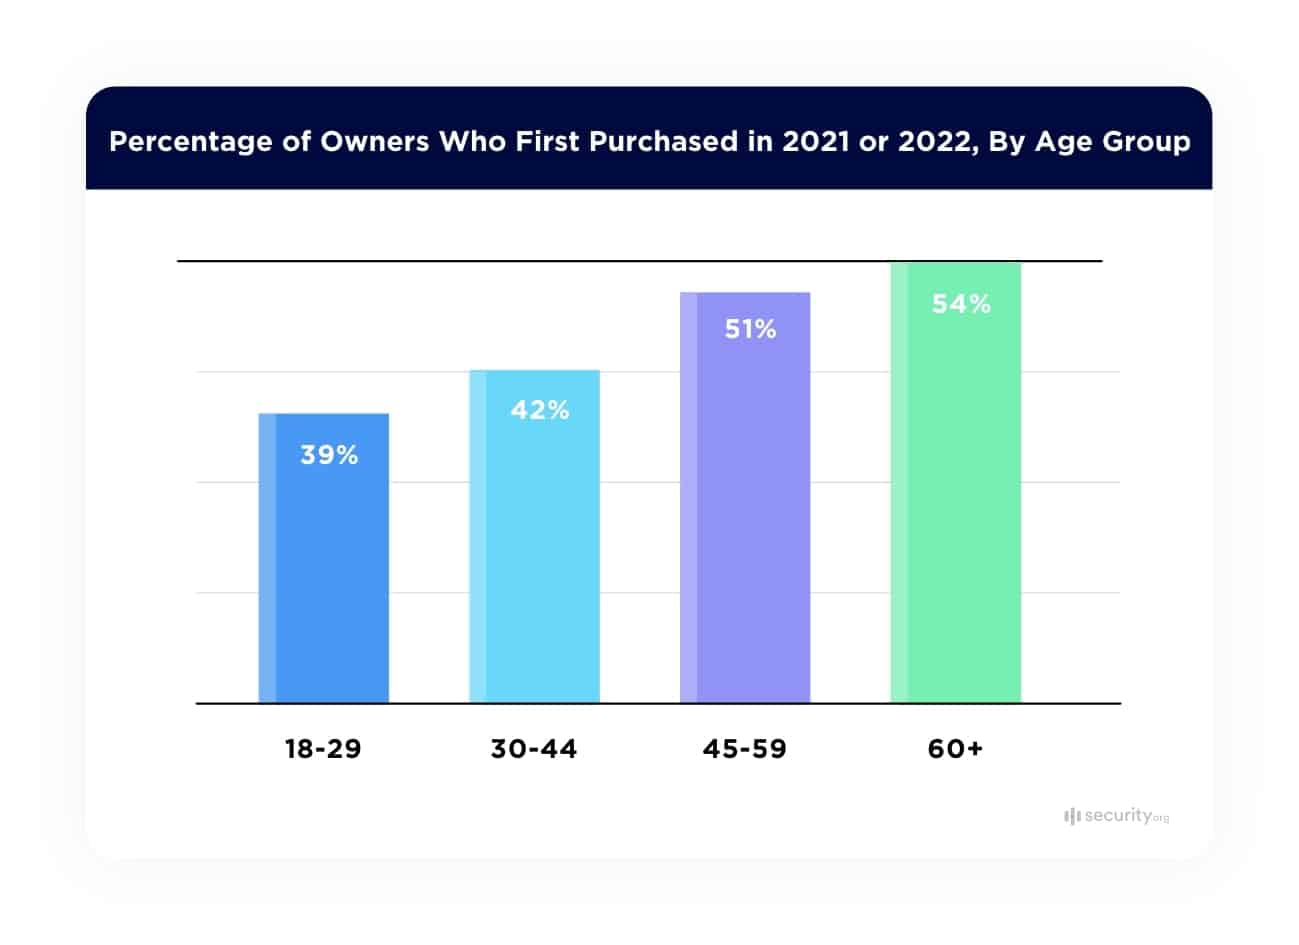 Percentage of Owners Who First Purchased in 2021 or 2022, By Age Group